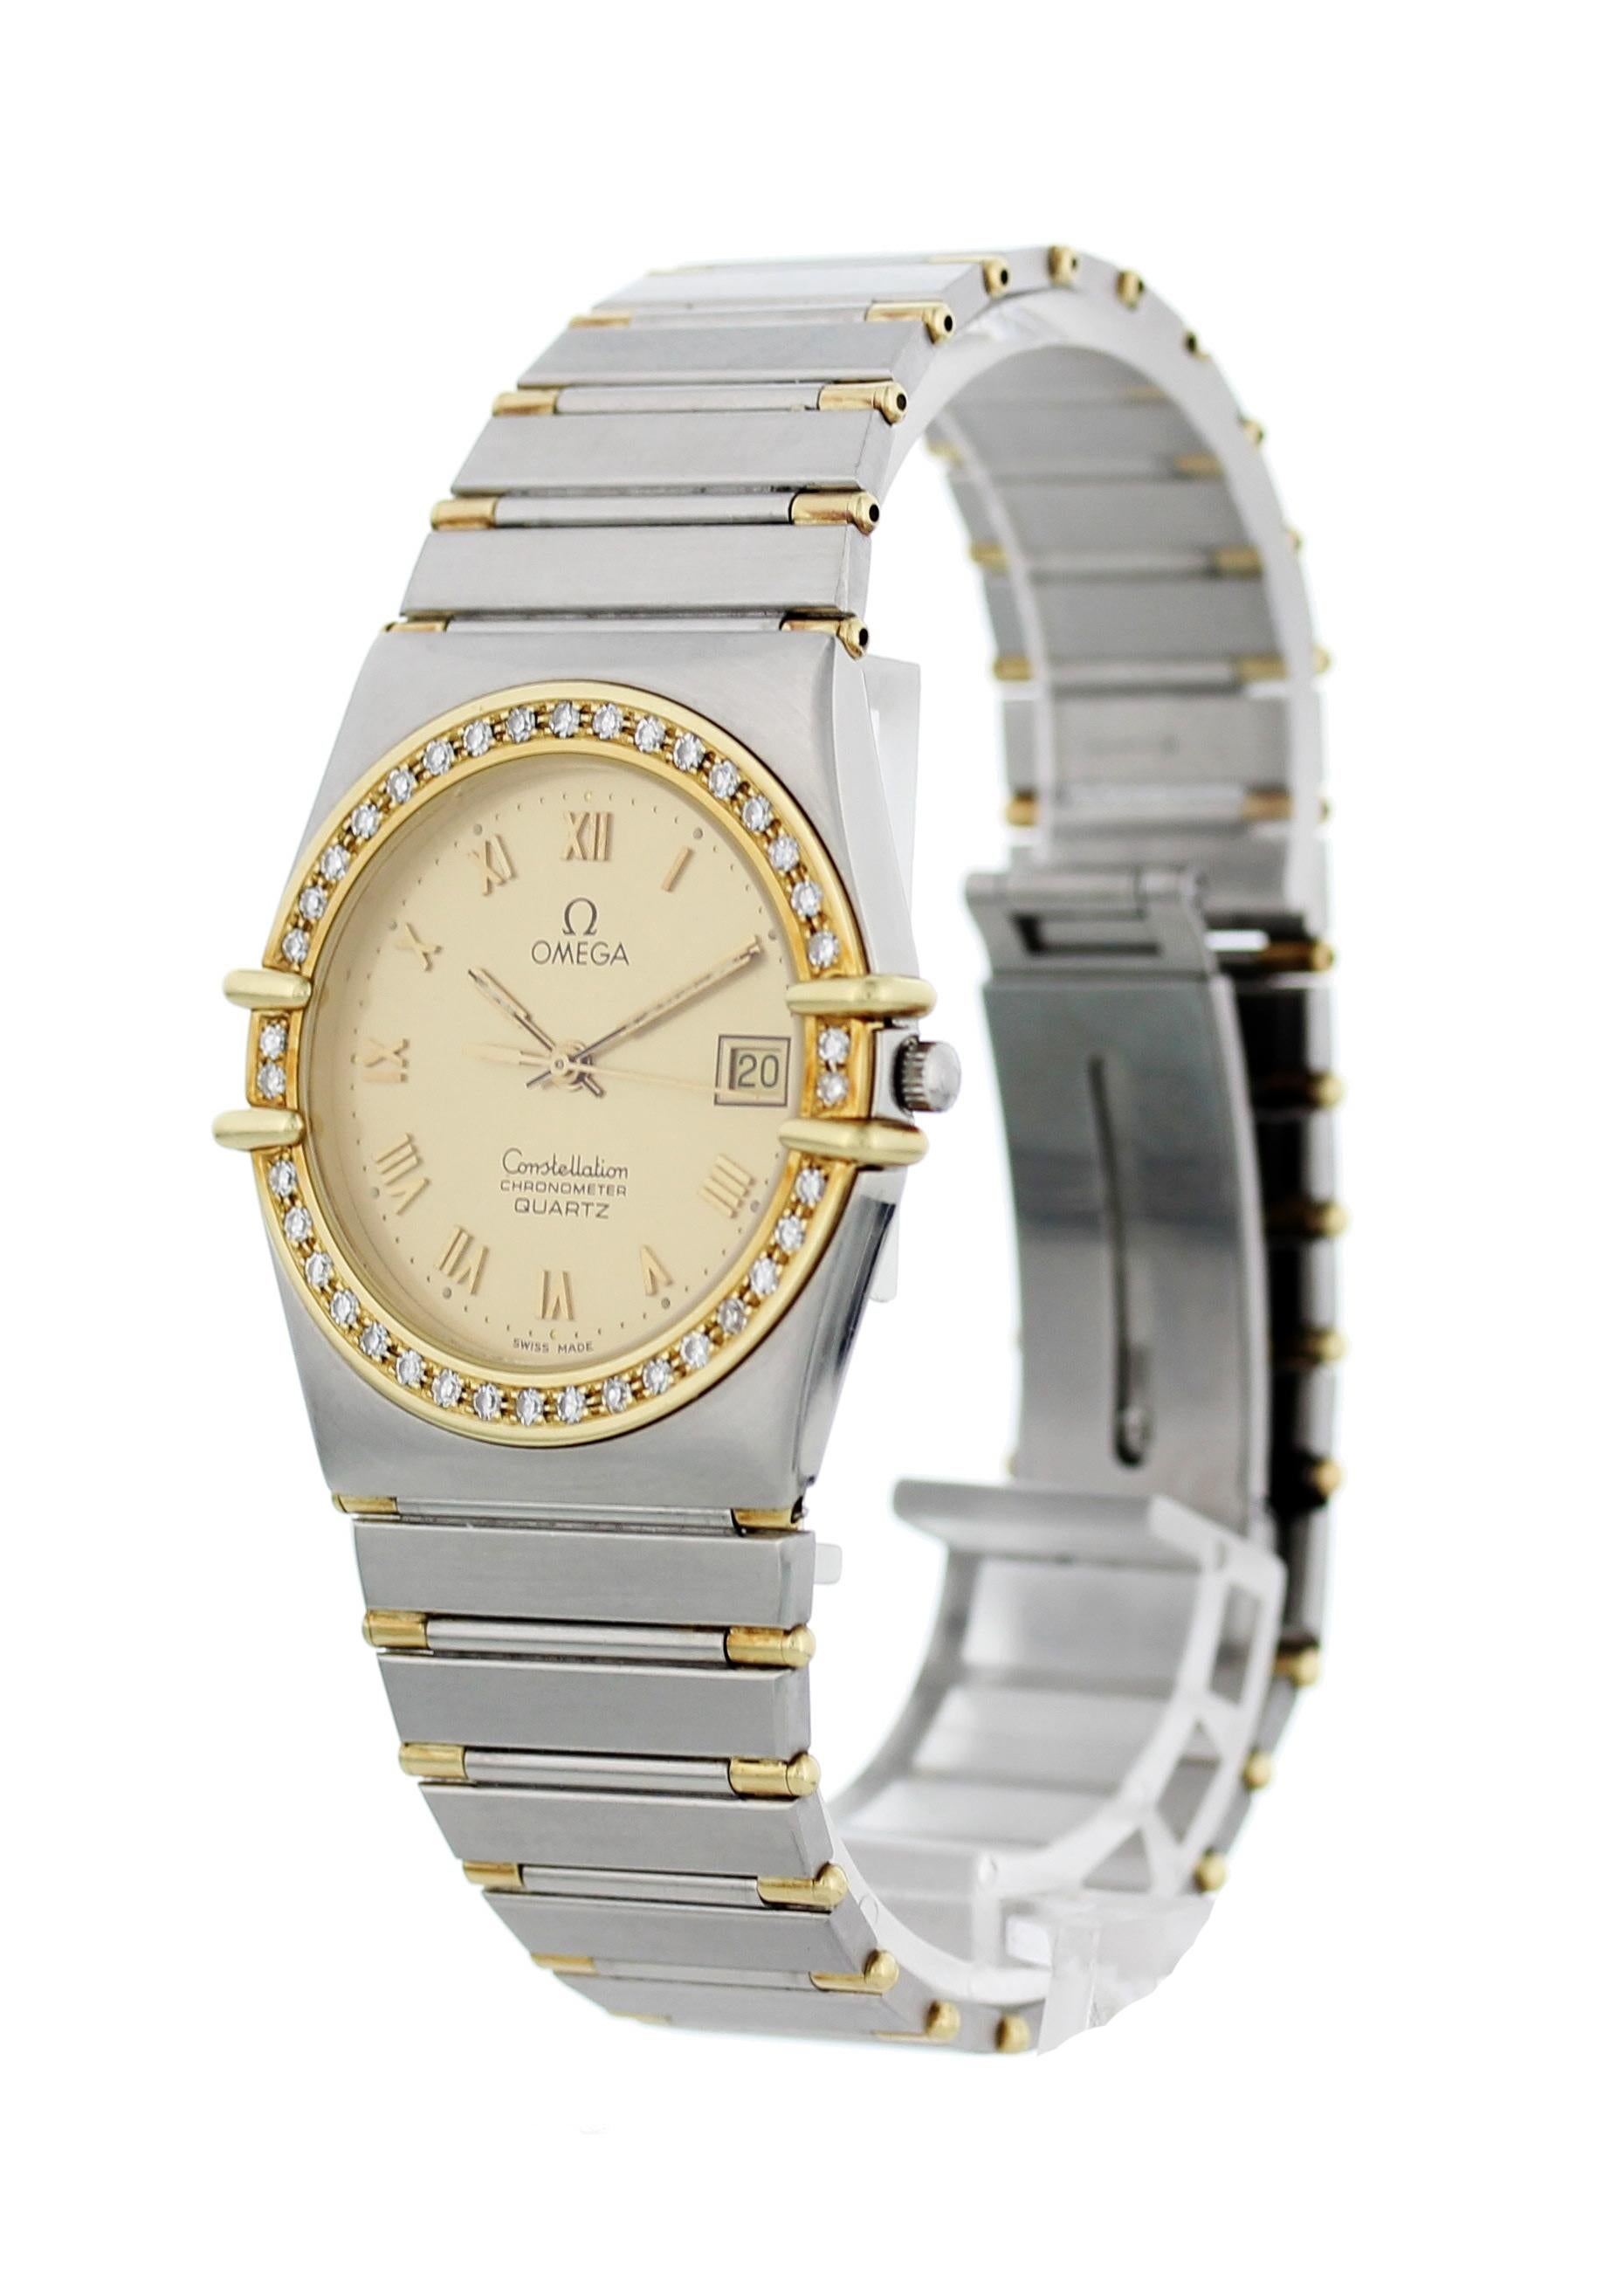 Omega Constellation. Stainless steel 32 mm case. 18k yellow gold Diamond bezel. Champagne dial with gold luminous hands and gold Roman numerals. Date display. Stainless steel and Yellow gold band with push button sliding clasp; will fit up to a 7.5